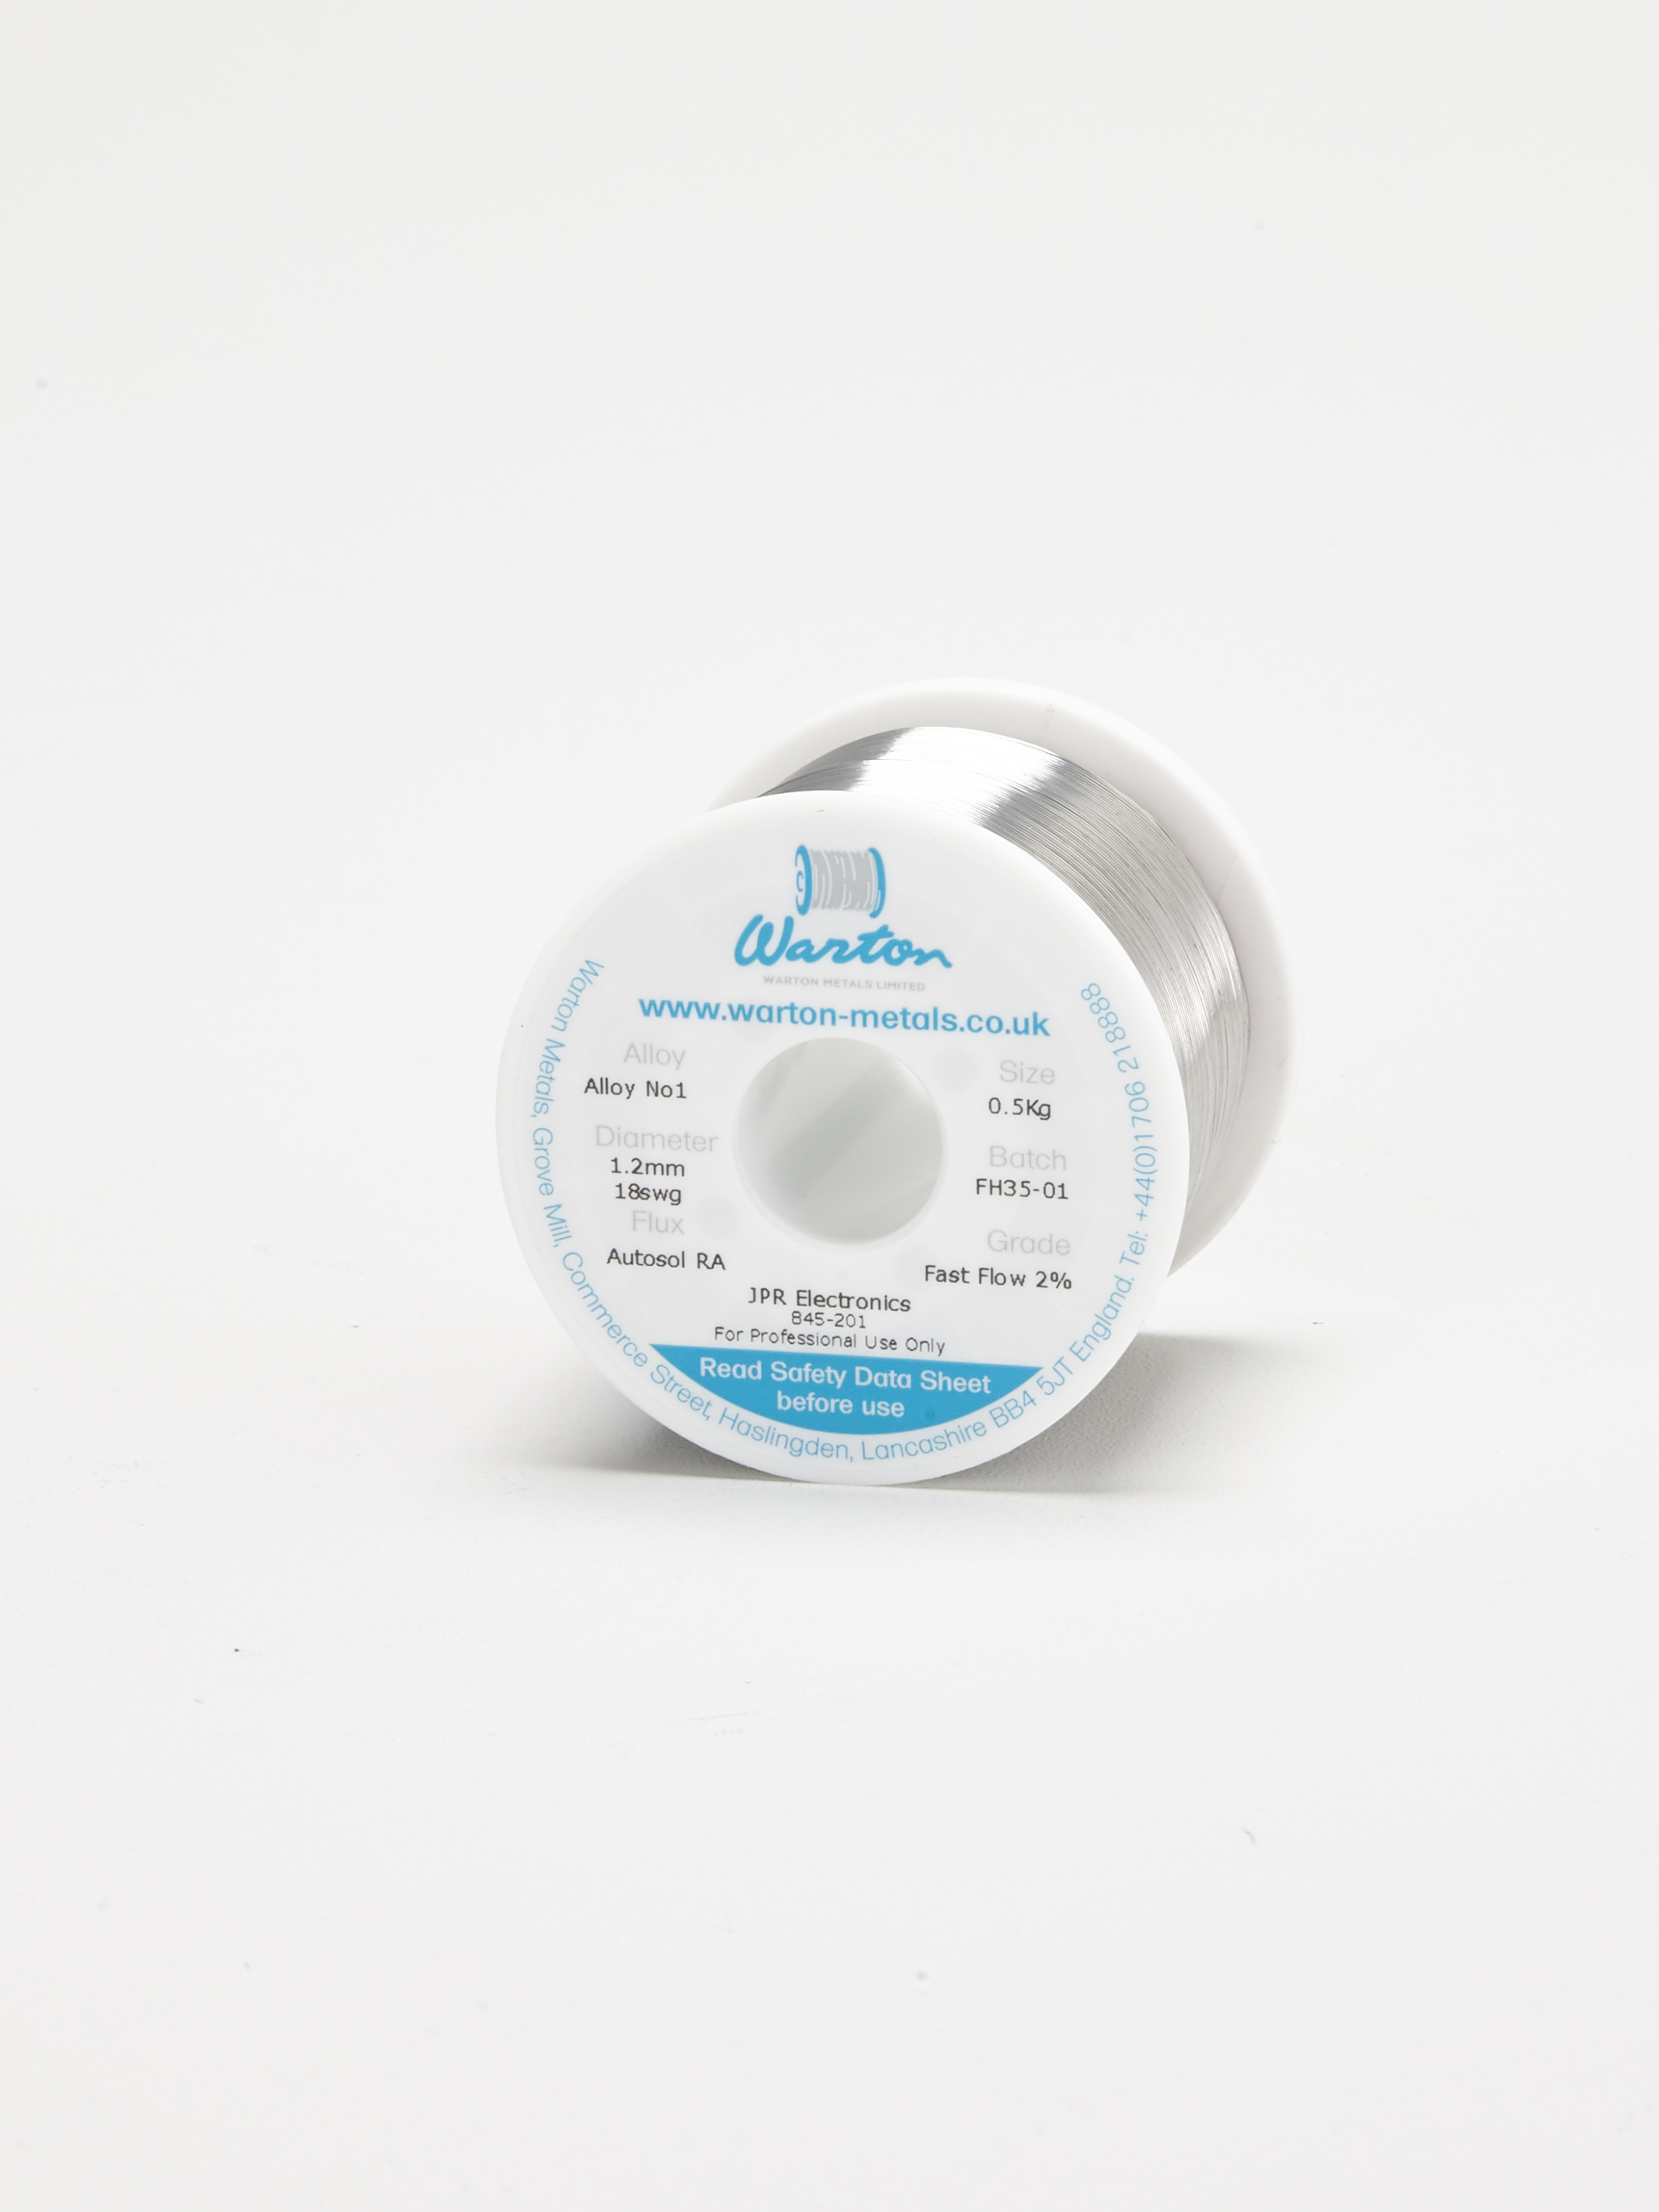 Autosol RA Alloy No. 1 Fast Flow 2% Solder Wire